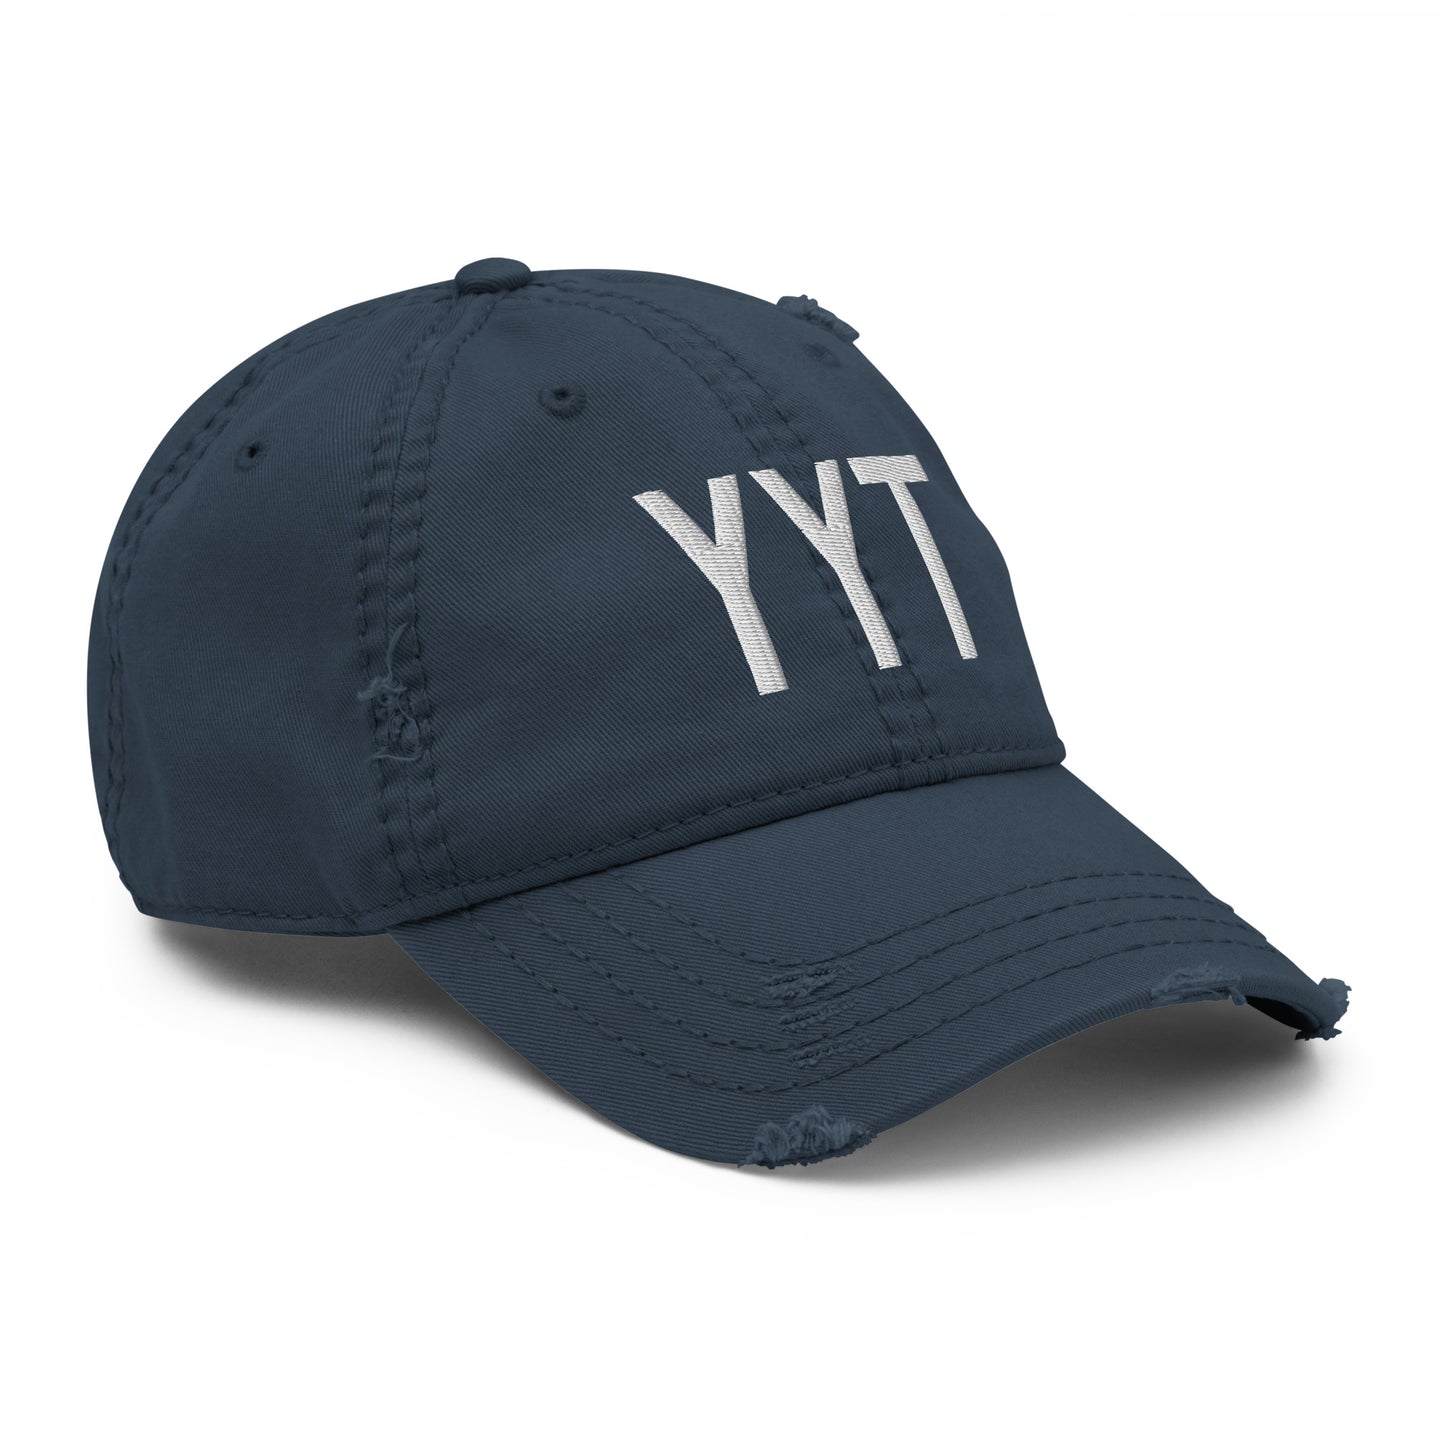 Airport Code Distressed Hat - White • YYT St. John's • YHM Designs - Image 14